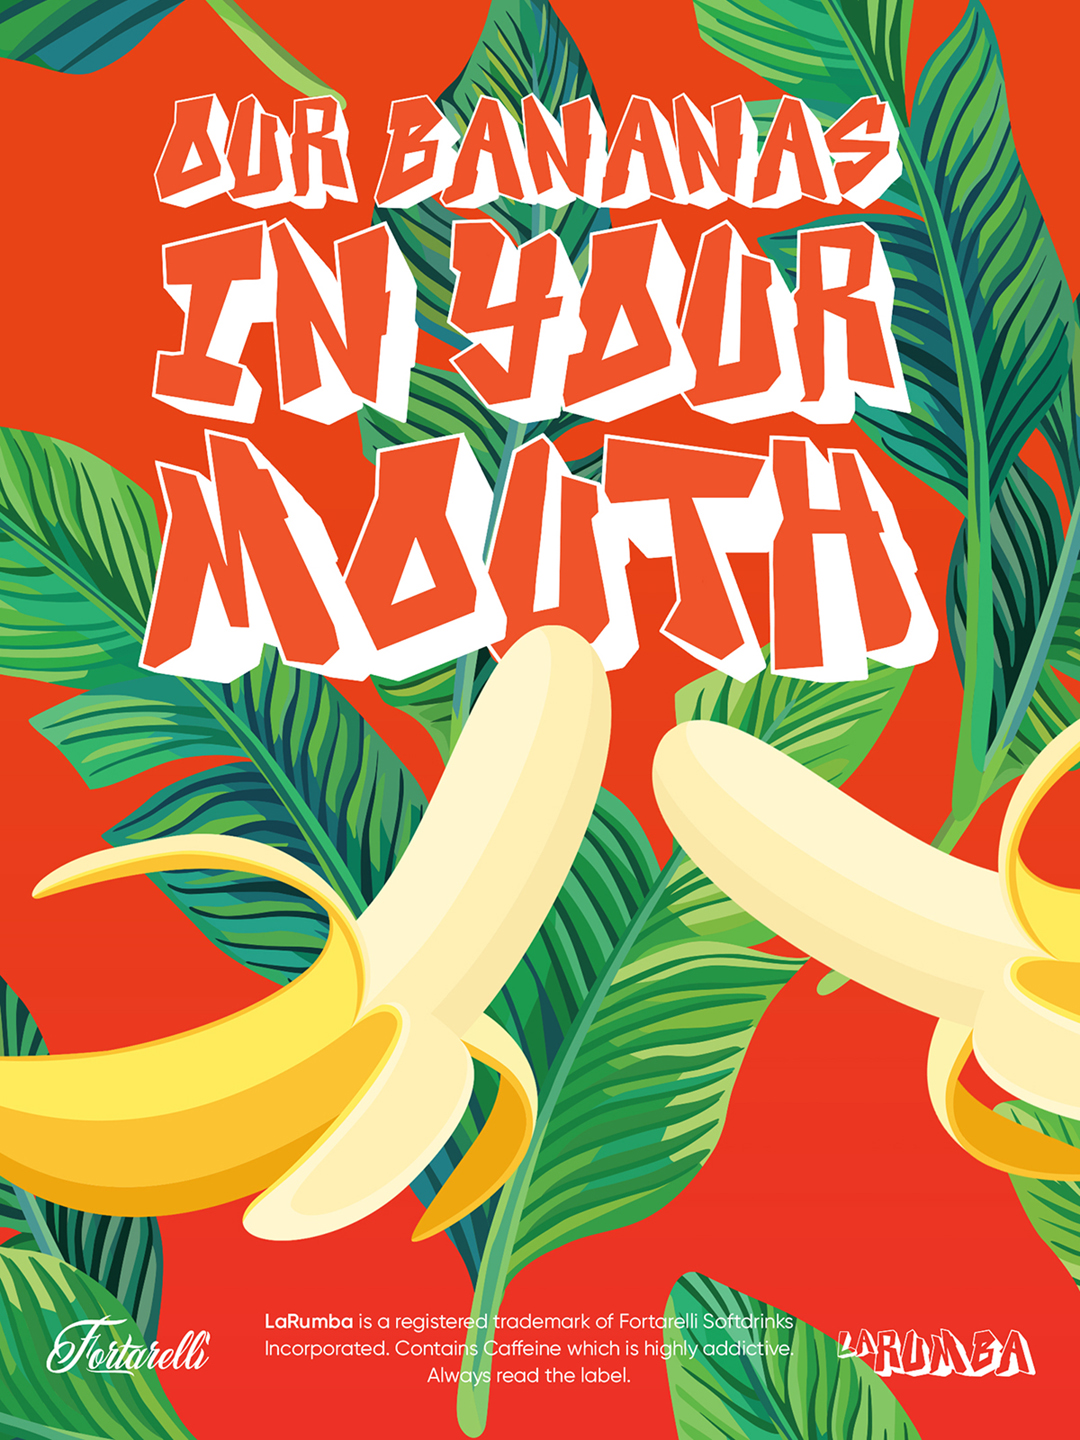 An advertising campaign poster for a soft drinks brand featuring two dueling bananas.